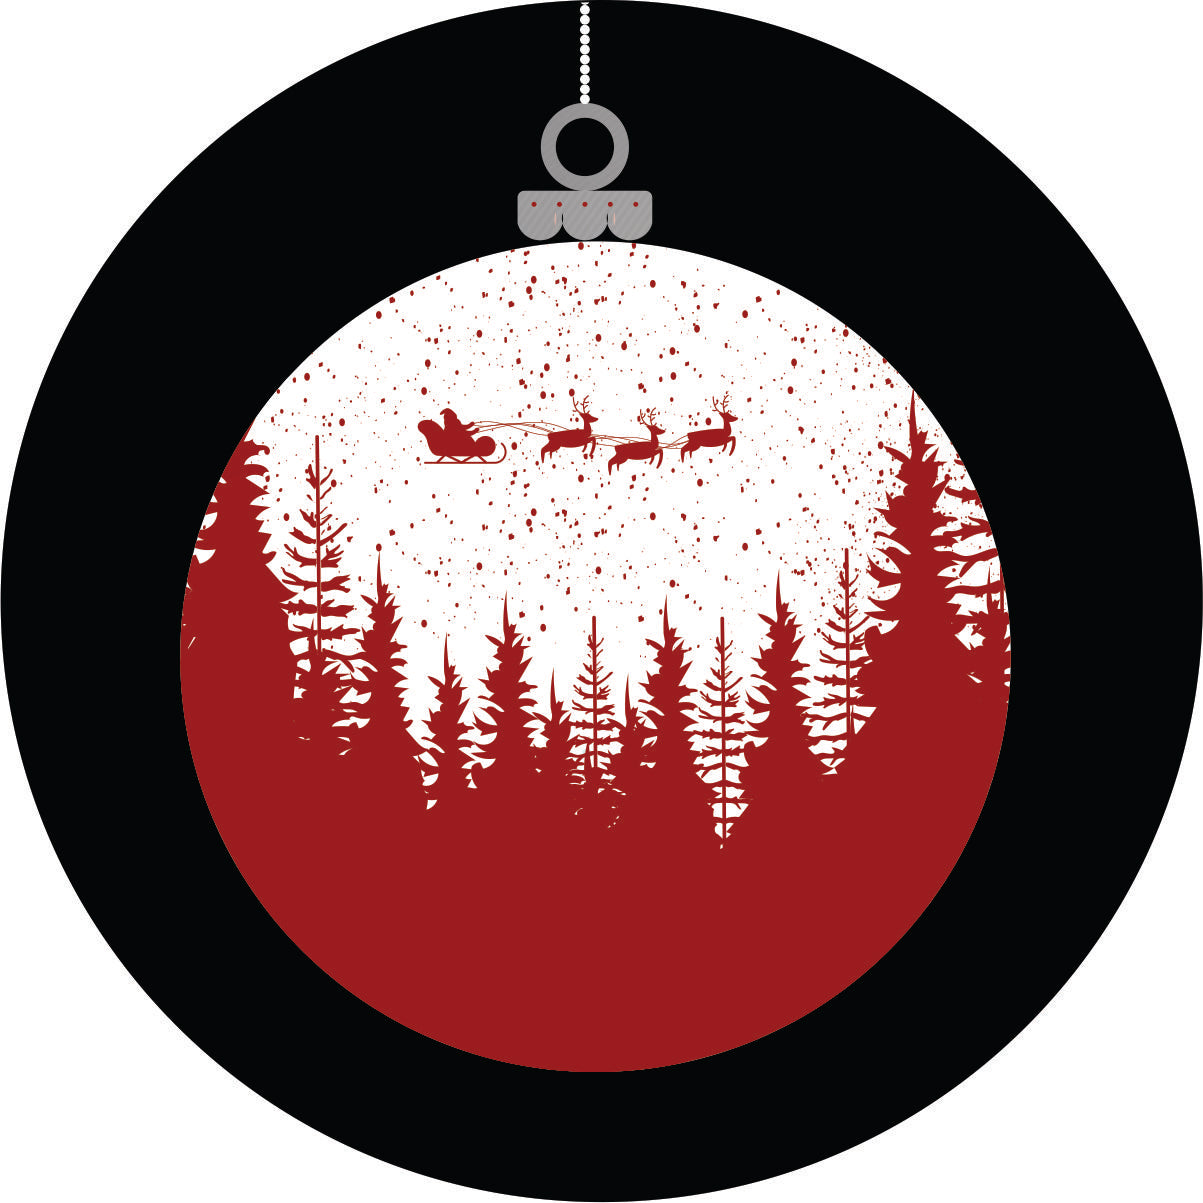 Spare tire cover for Jeep of a red silhouette of Santa Claus flying over the forest and snow as a Christmas tree globe ornament.